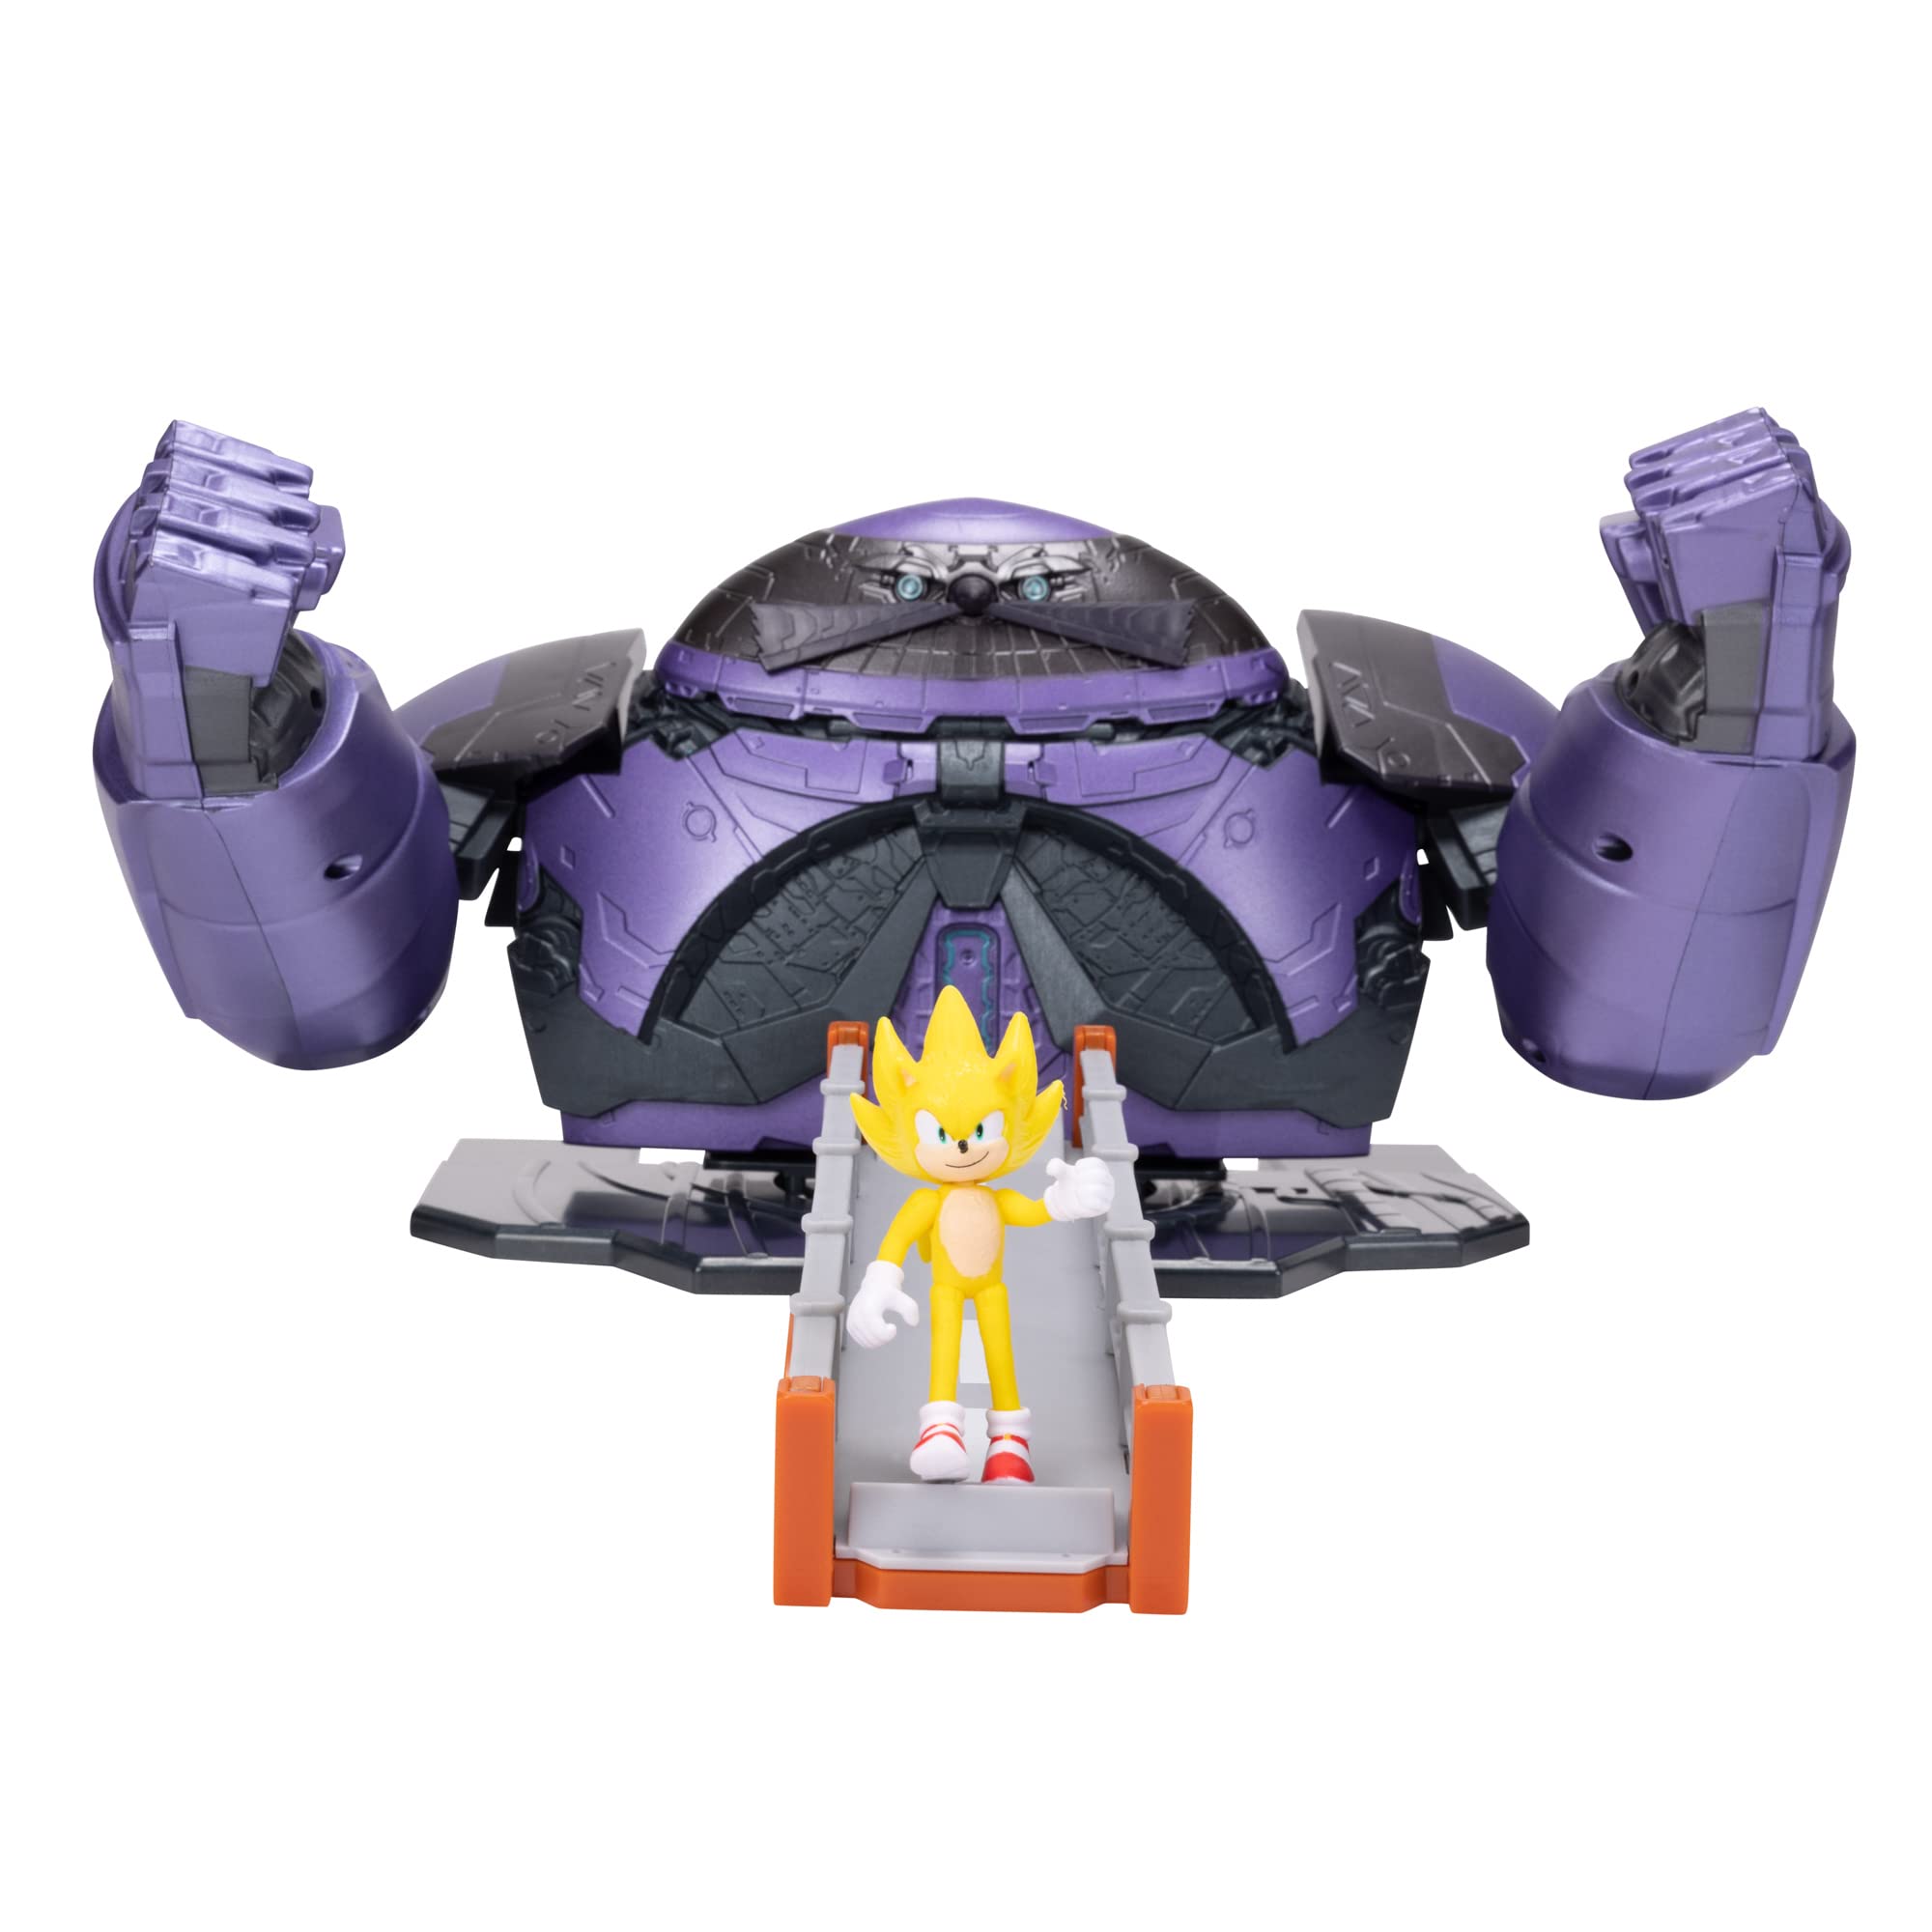 Sonic the Hedgehog 2 Movie: Giant Eggman with 2.5'' Super Sonic Action Figure Playset $11.48 + Free Shipping w/ Prime or on $35+